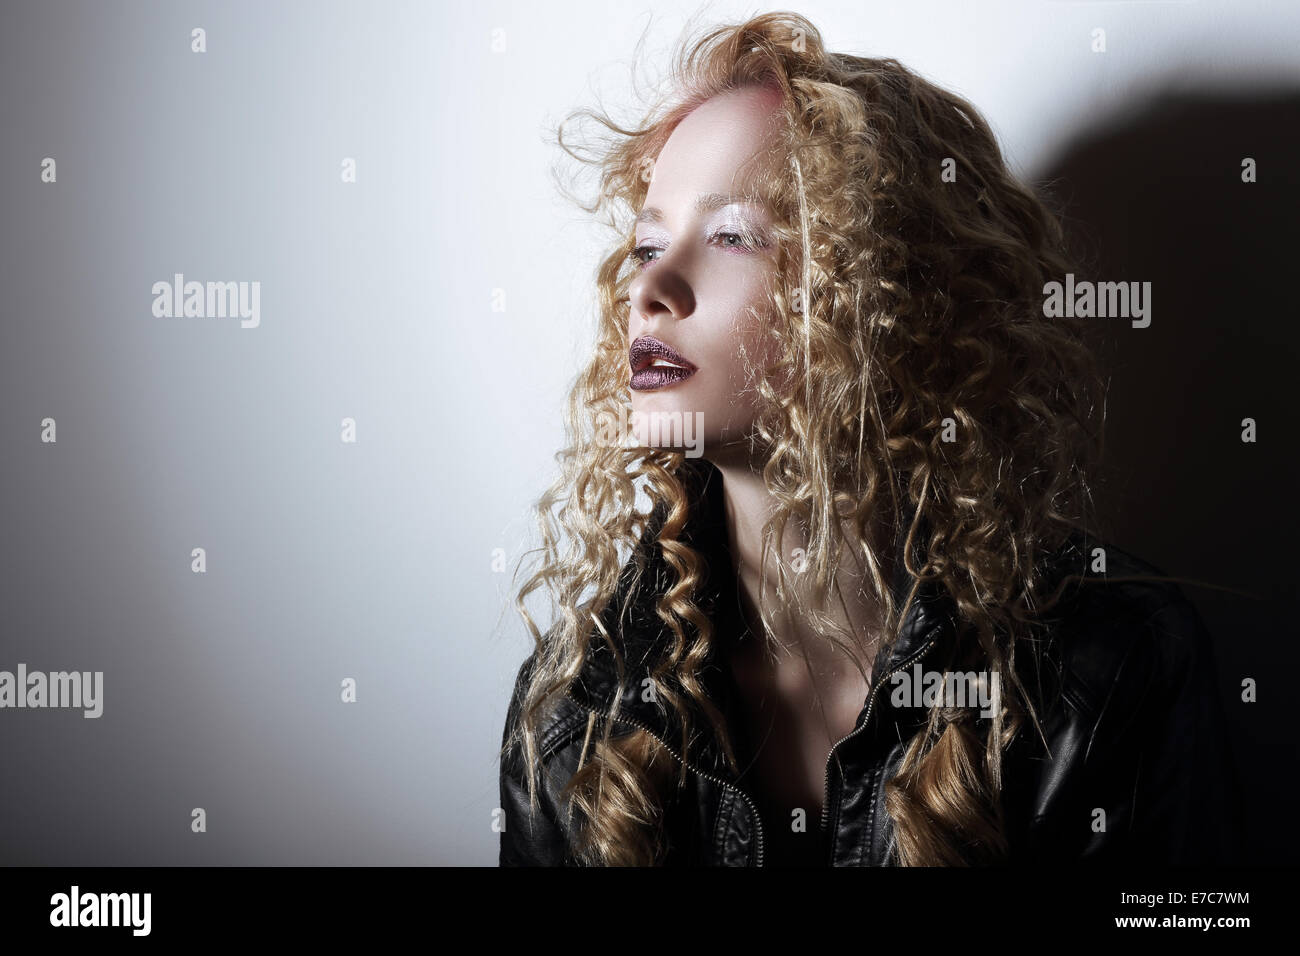 Portrait of Young Woman with Frizzy Hair Stock Photo